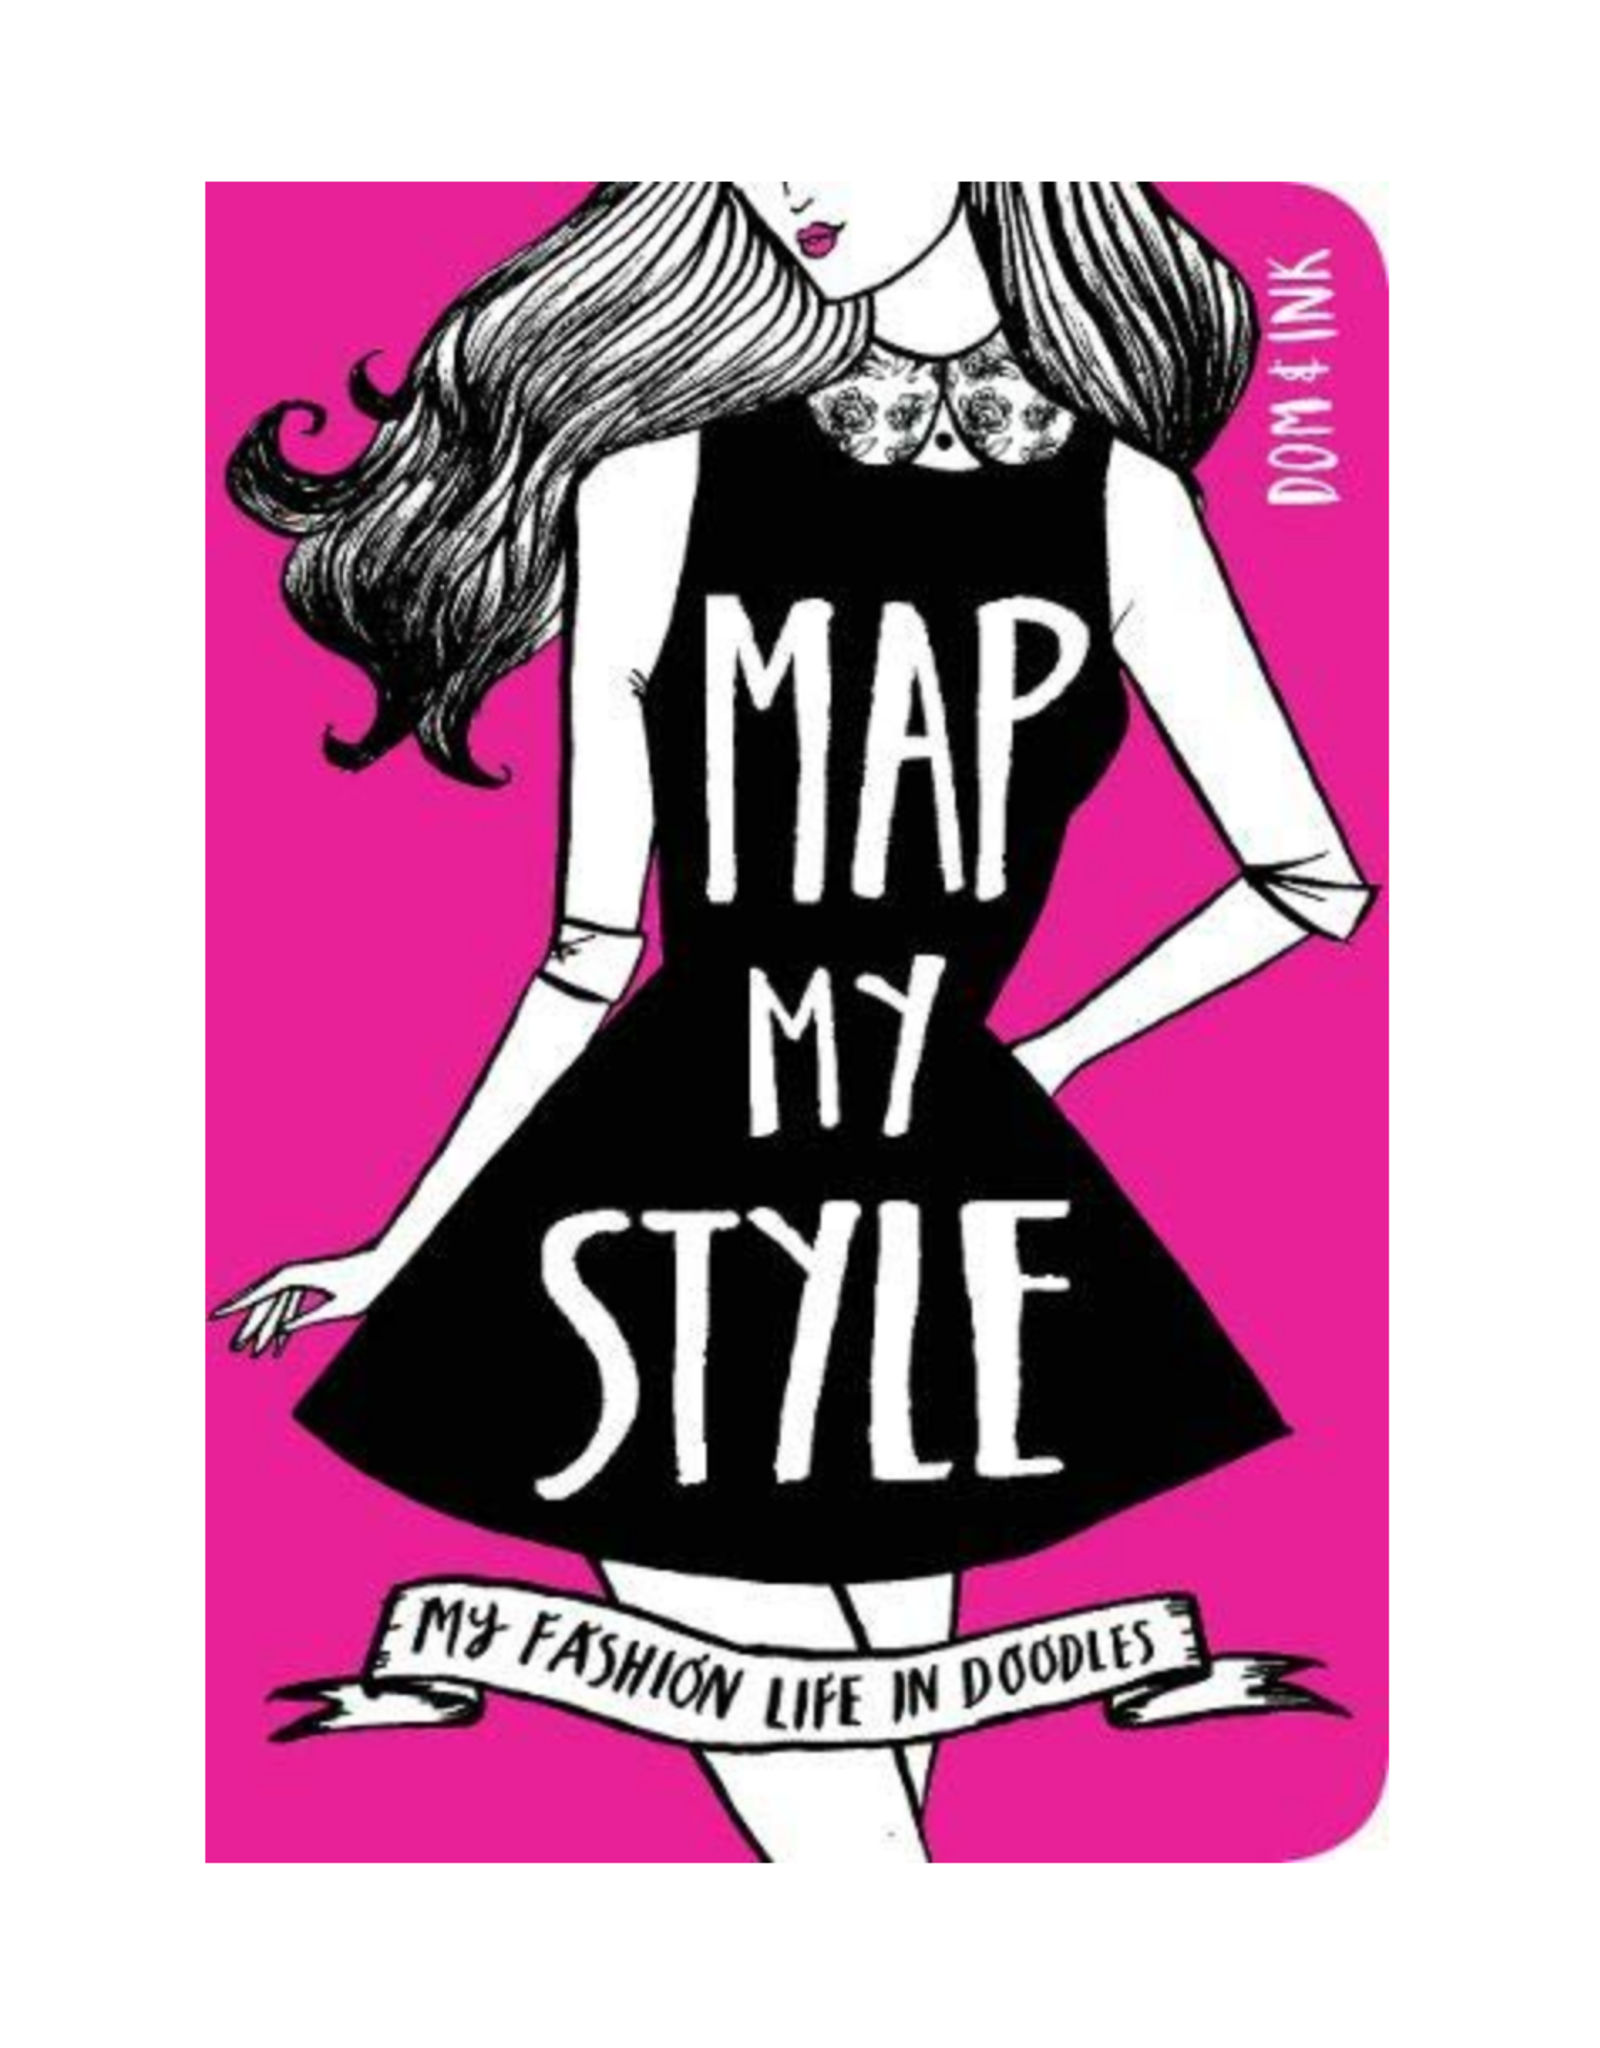 Map My Style - My Fashion Life in Doodles